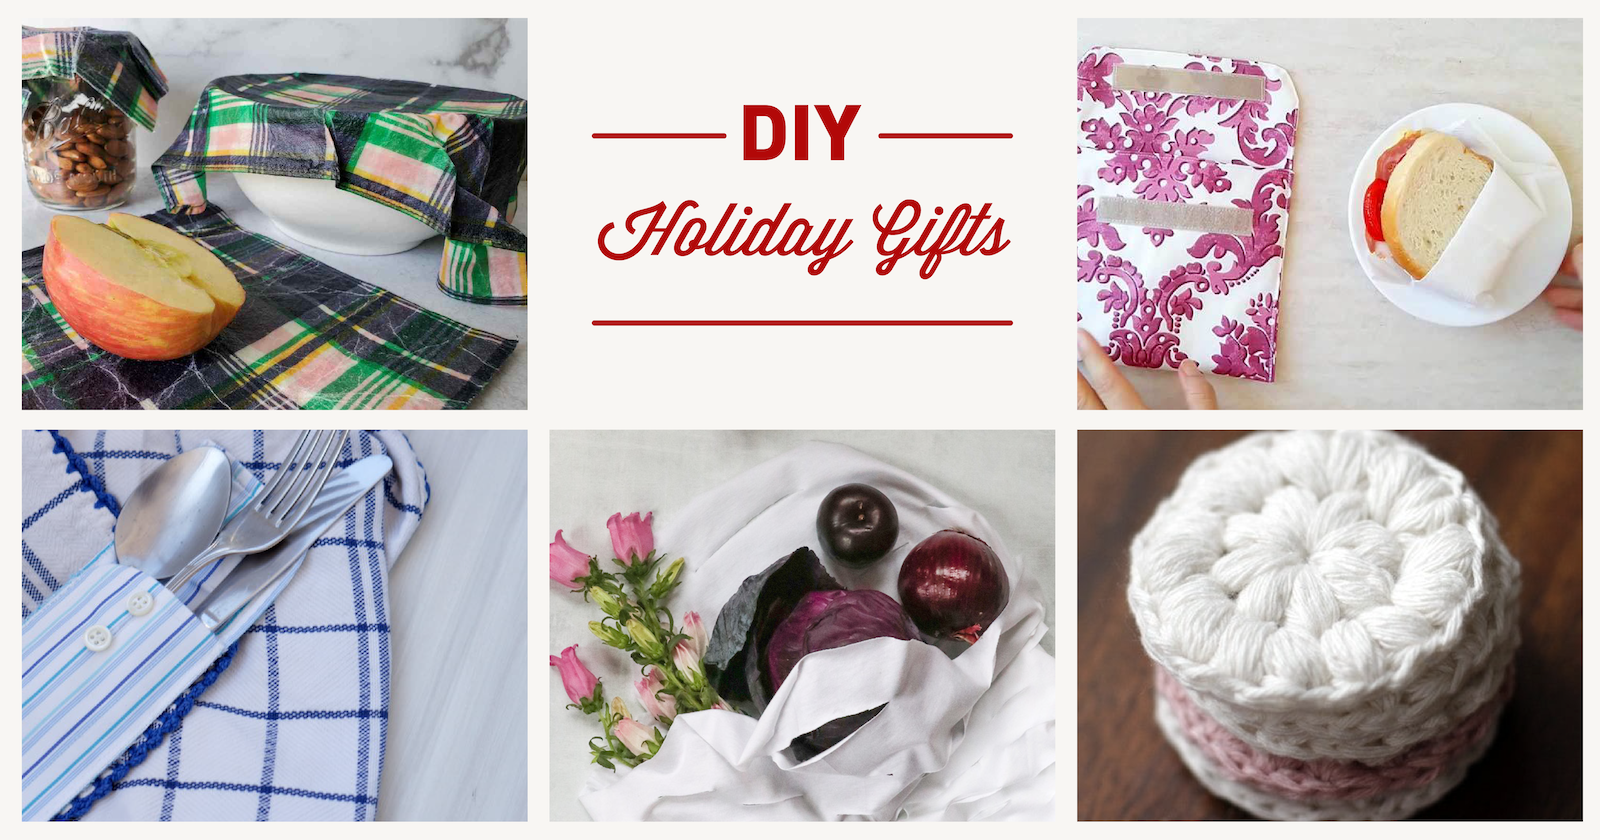 DIY Christmas Gifts that Help Reduce Everyday Waste